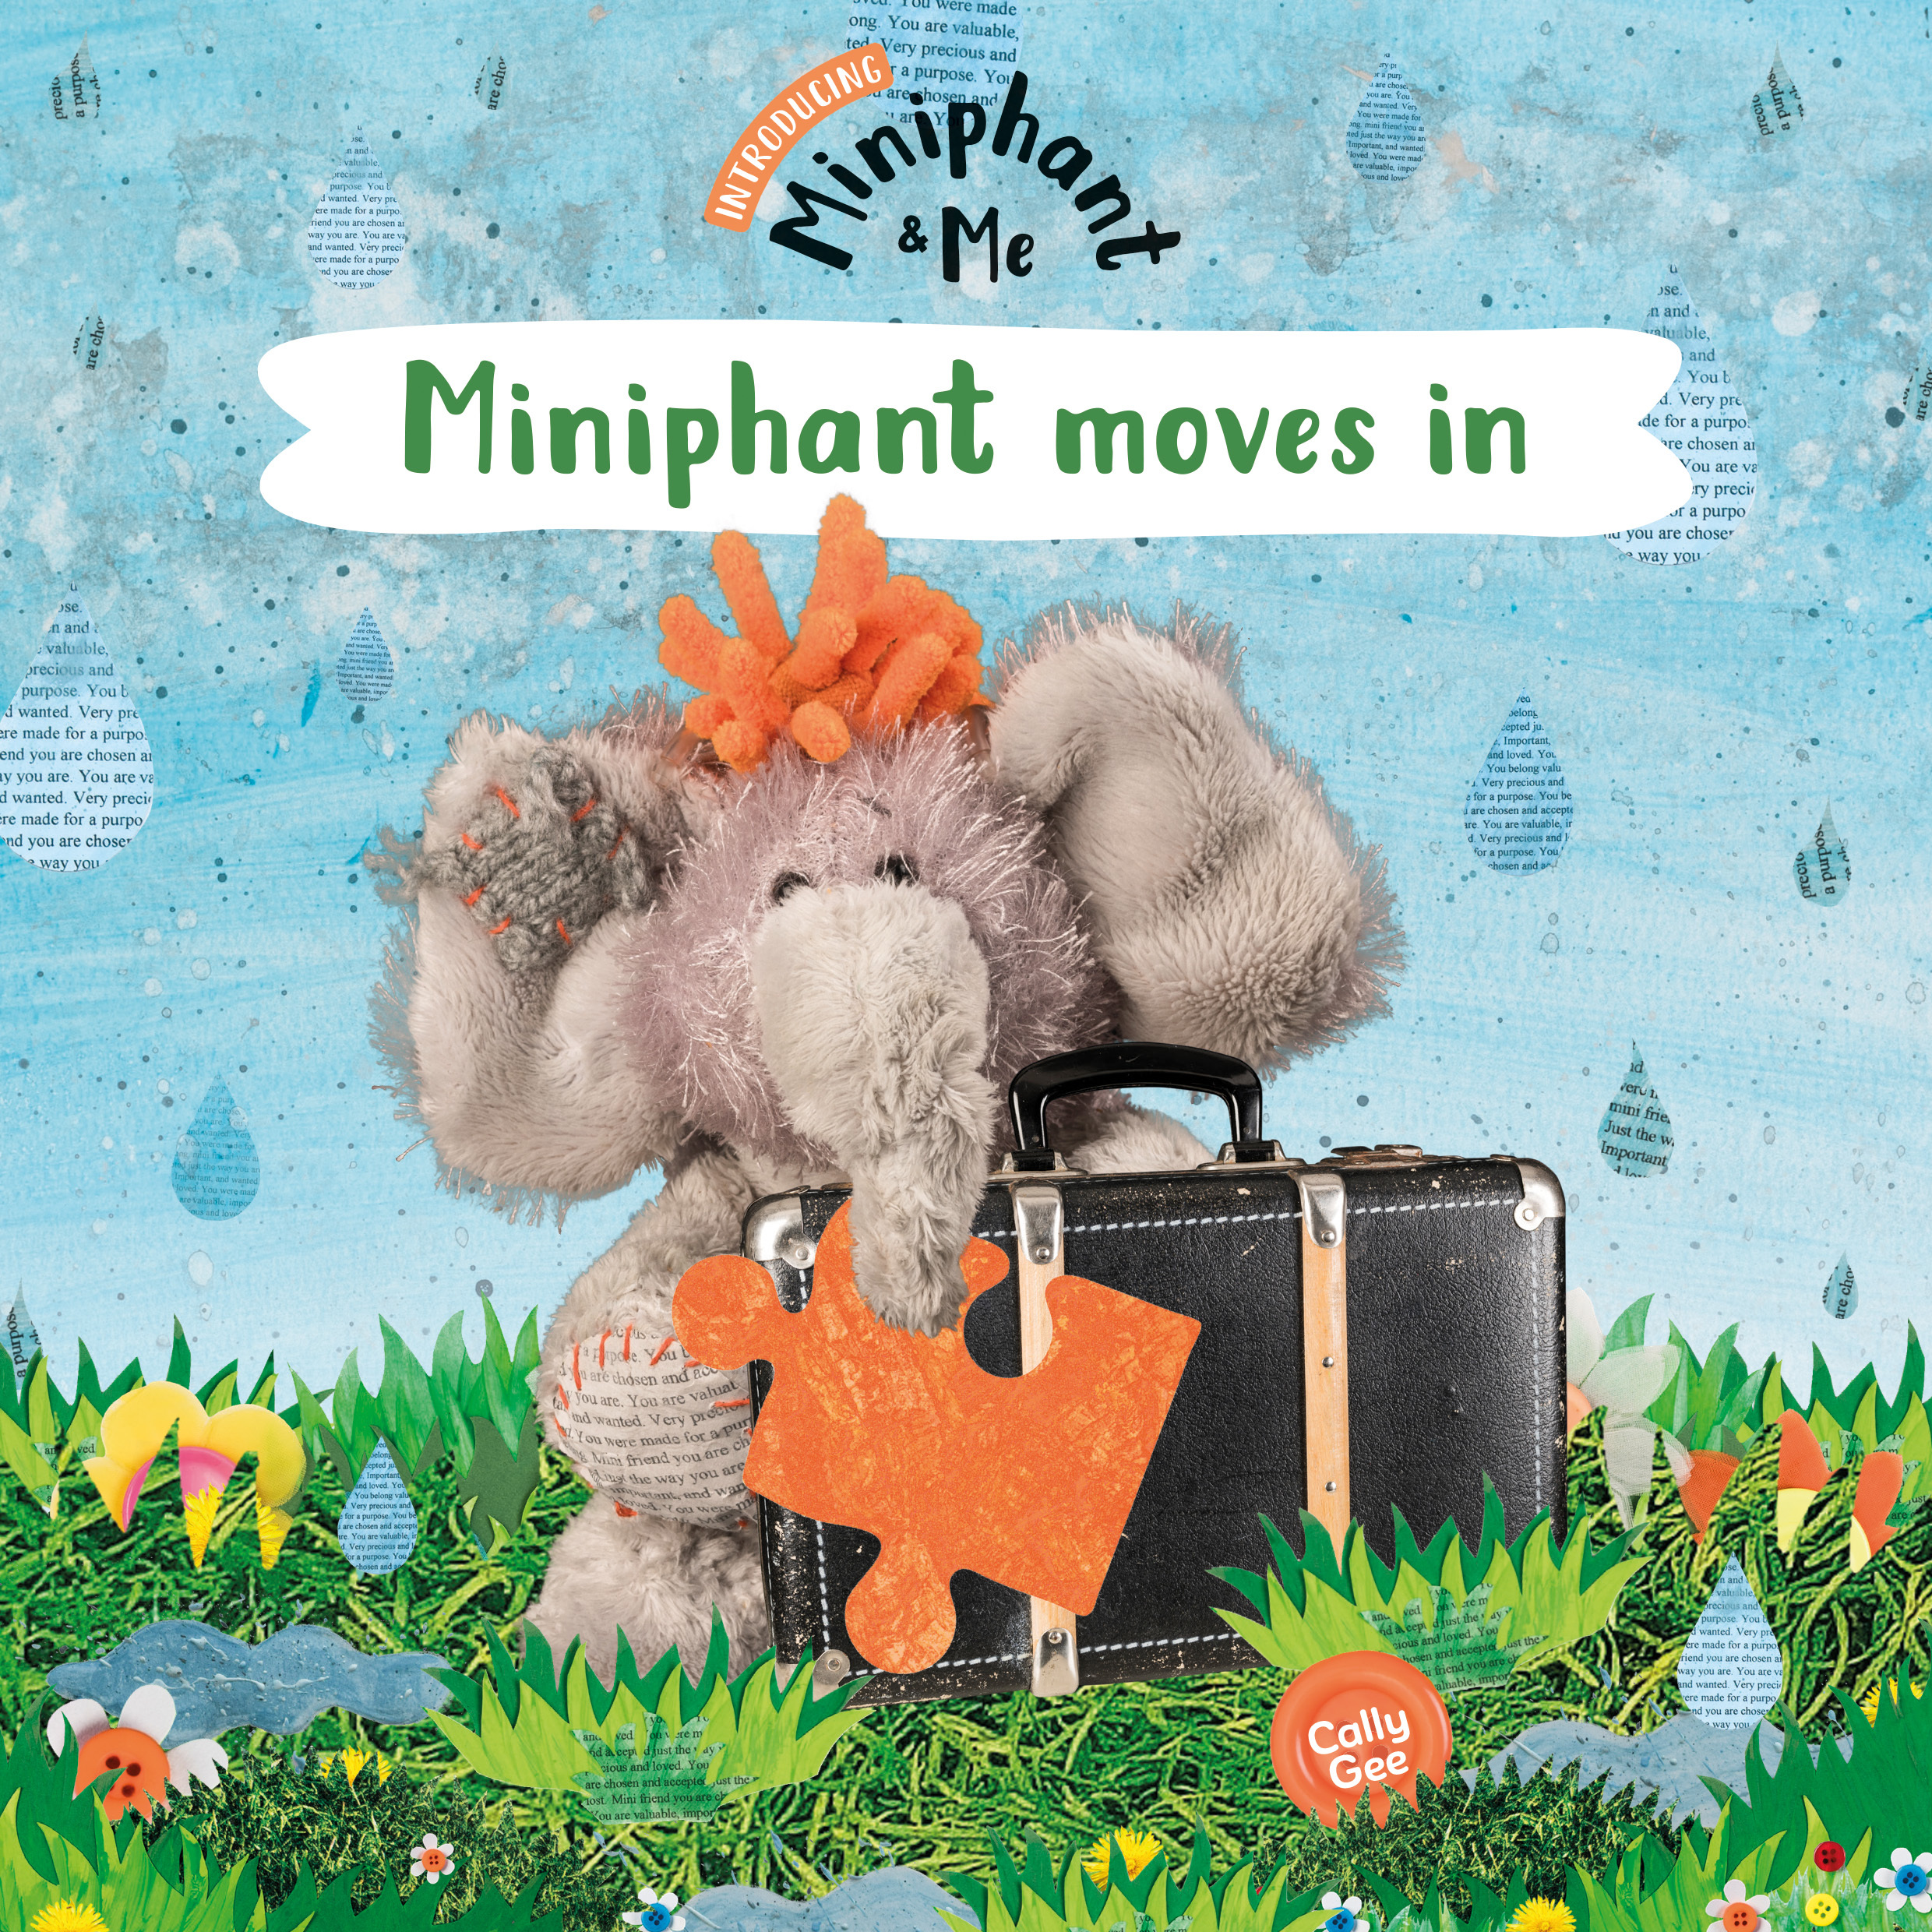 More information on Miniphant & Me Miniphant Moves On